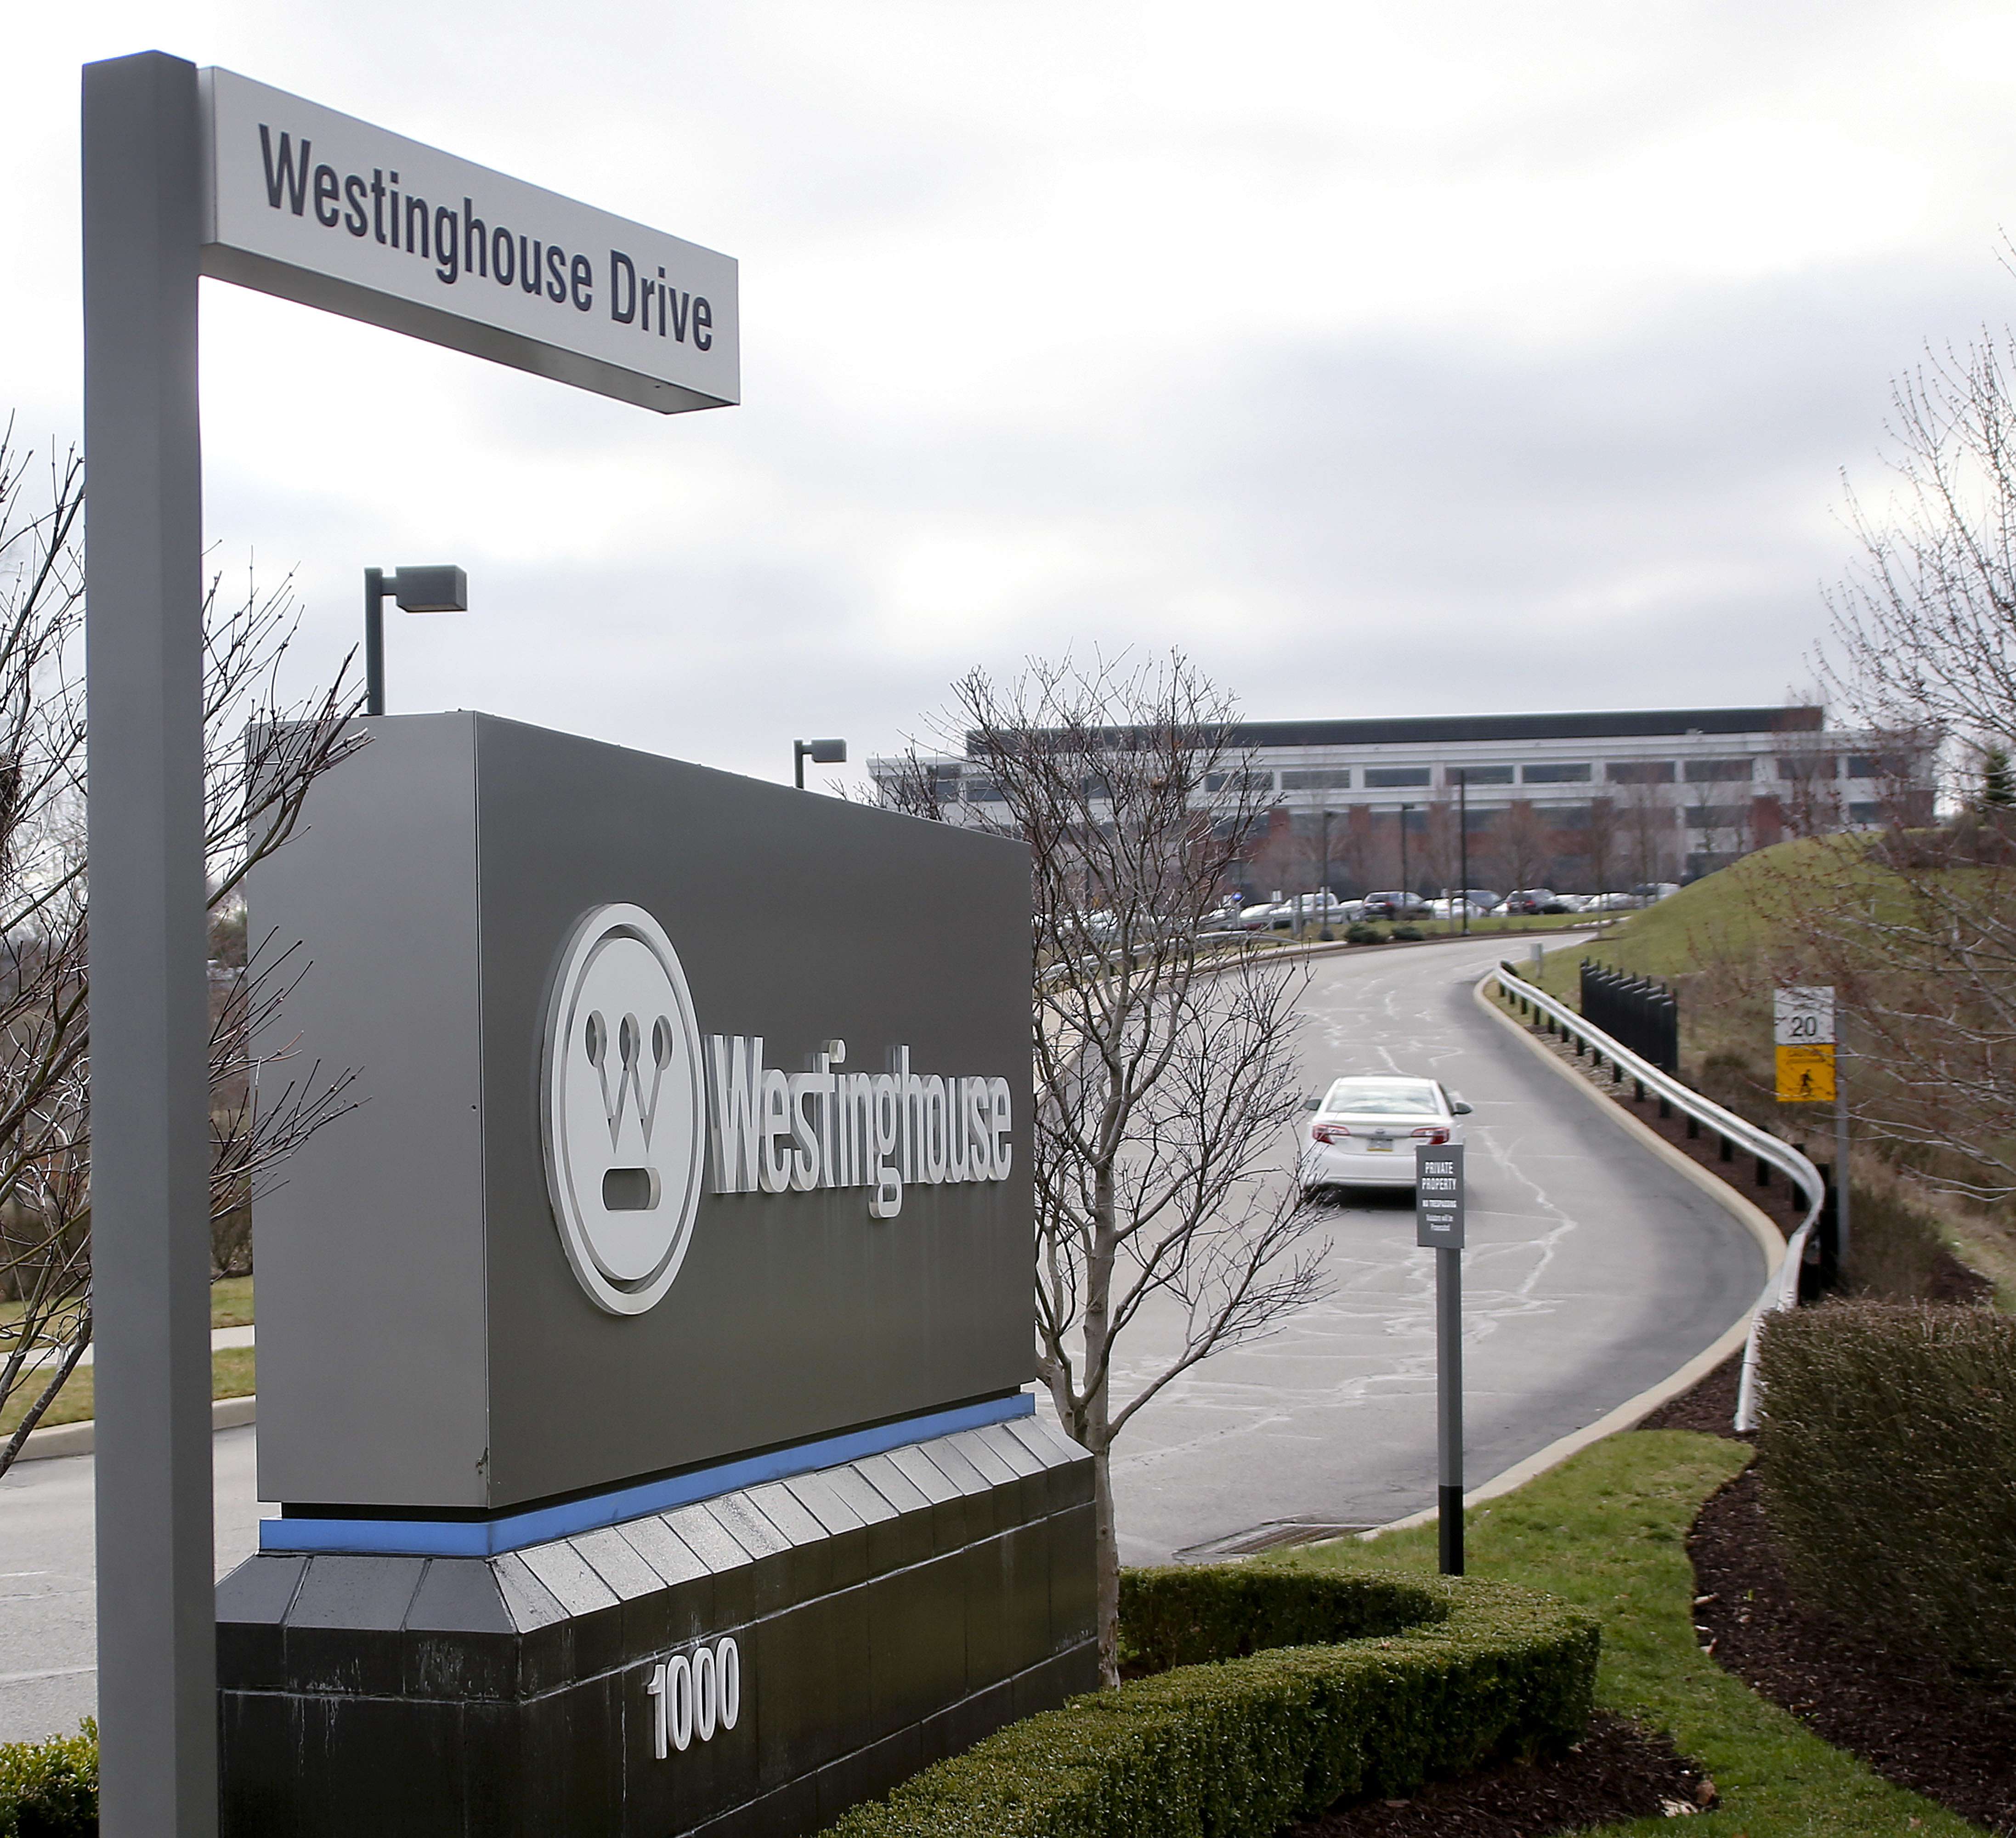 US officials are concerned Chinese investors may try to buy Westinghouse Electric after the company filed for bankruptcy protection on March 29. Photo: AP